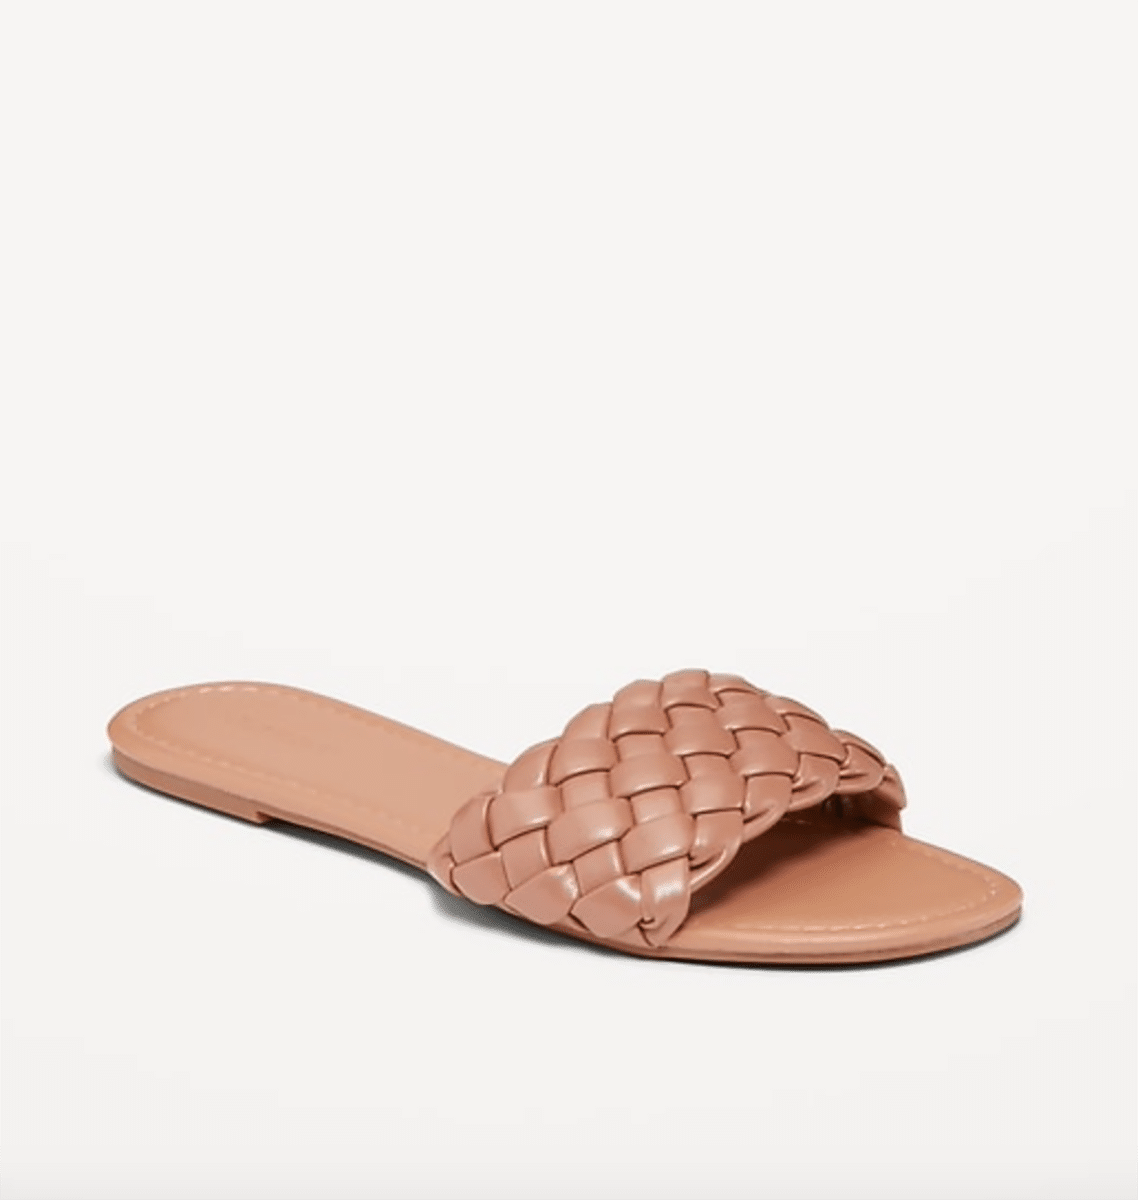 Best Chanel sandals dupe picks, by fashion blogger What The Fab